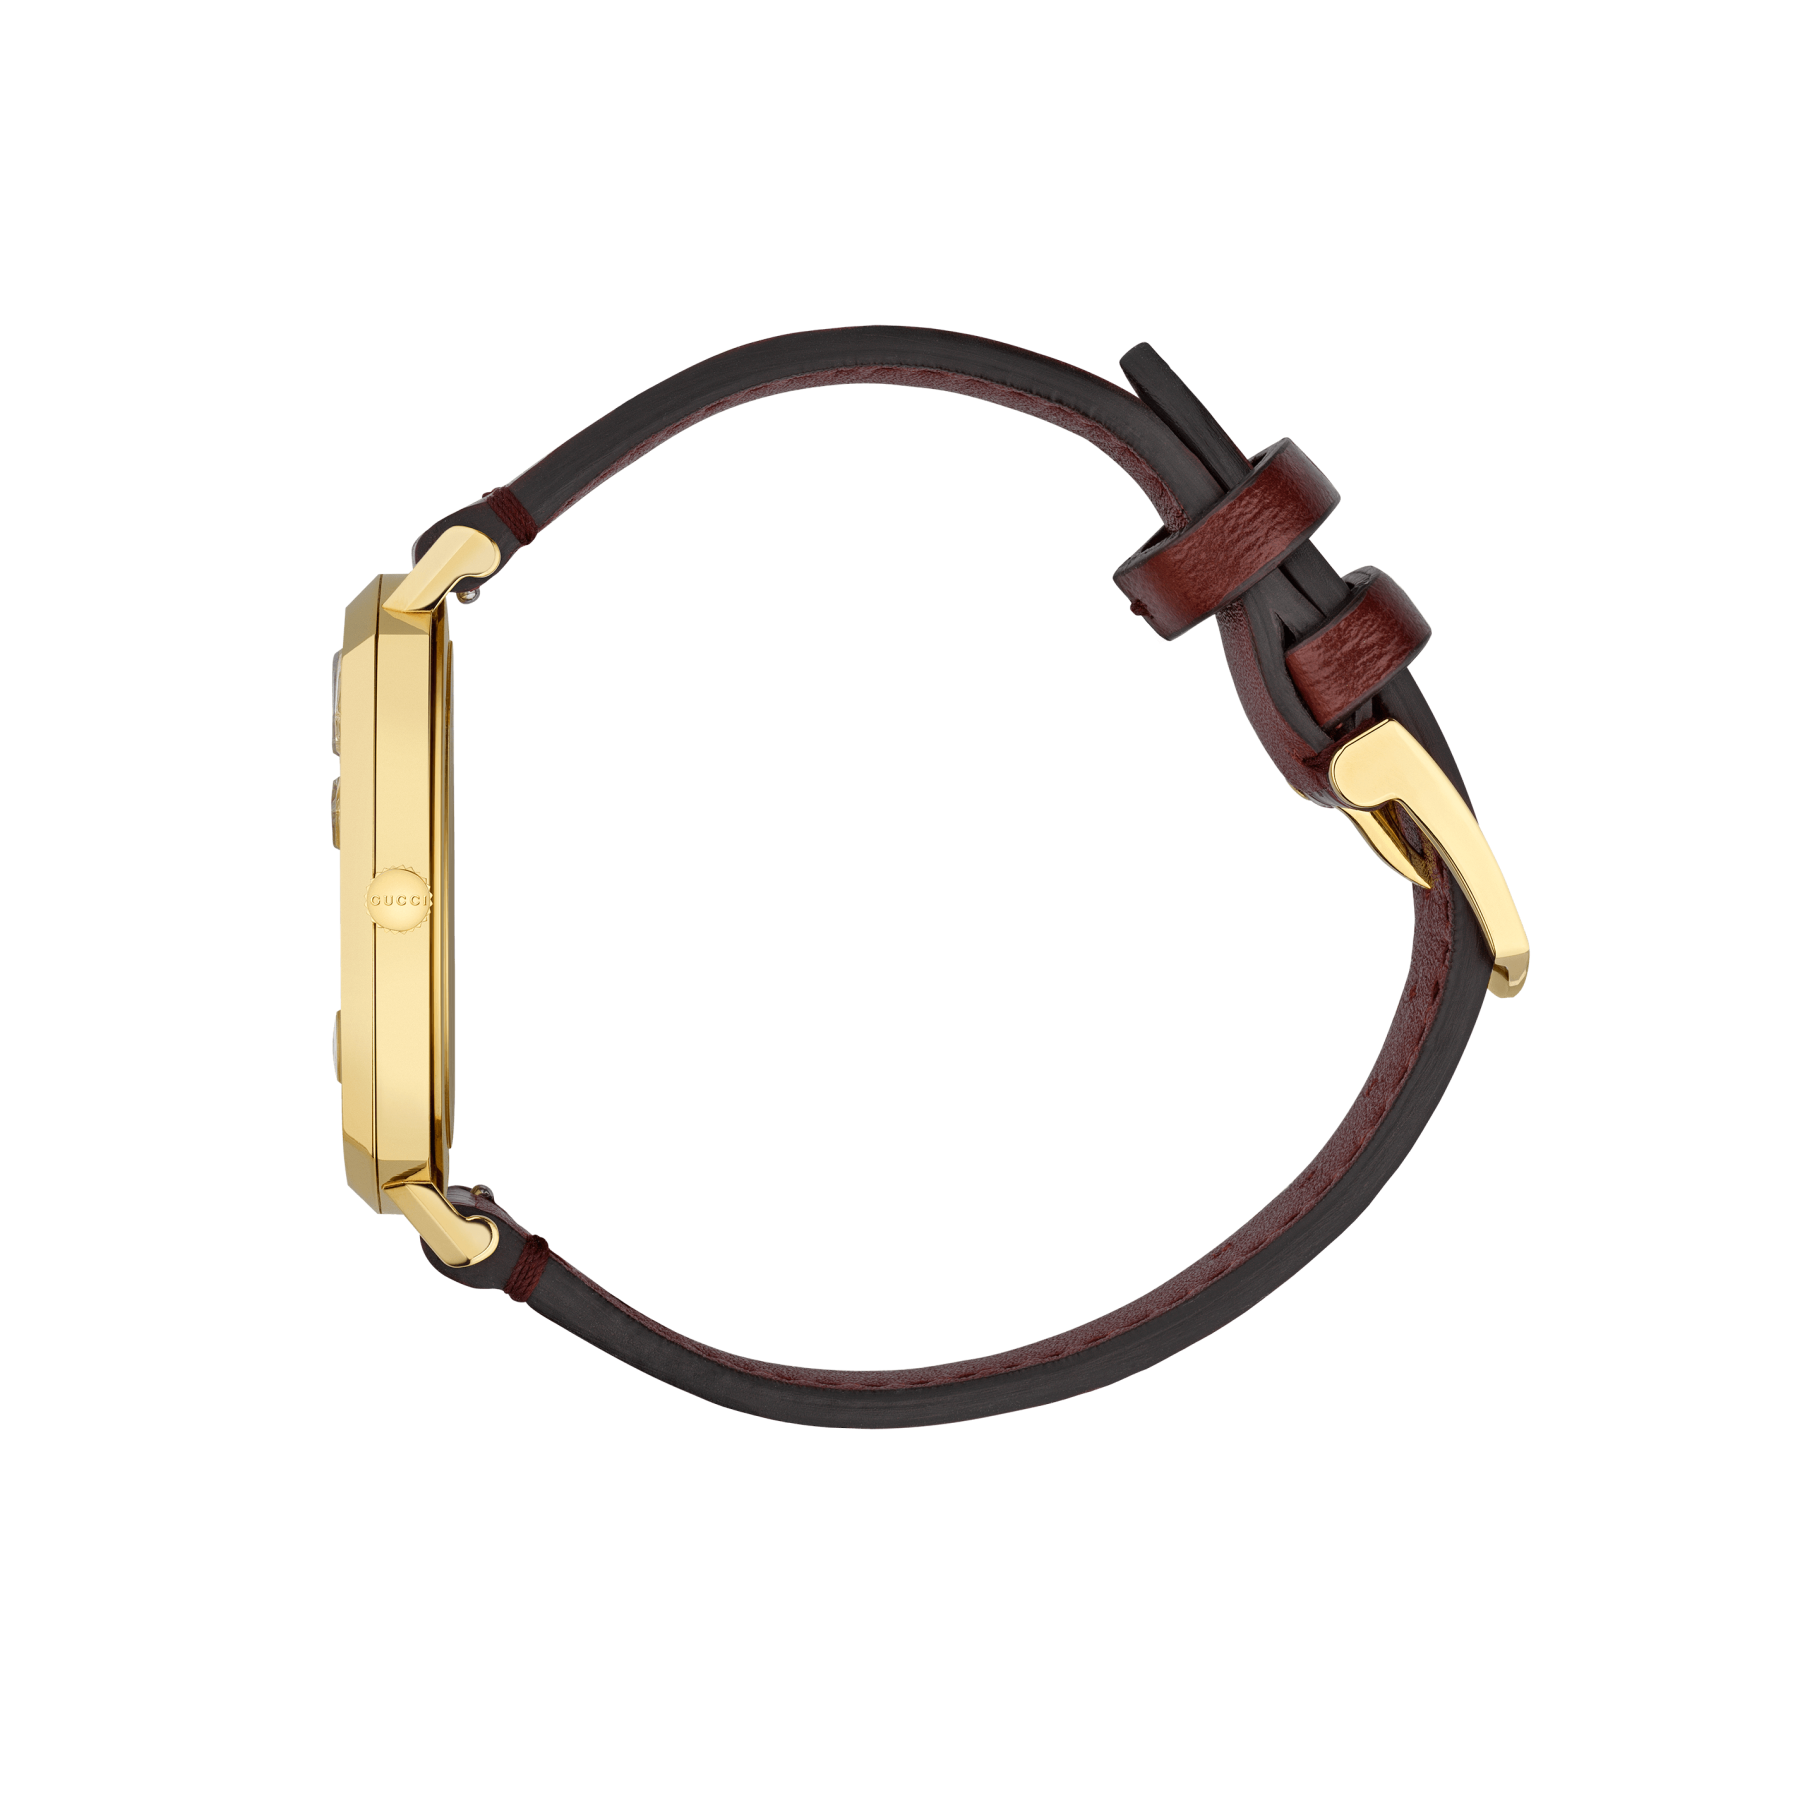 Gucci Grip 38mm Yellow Gold and Bordeaux Leather Strap side view